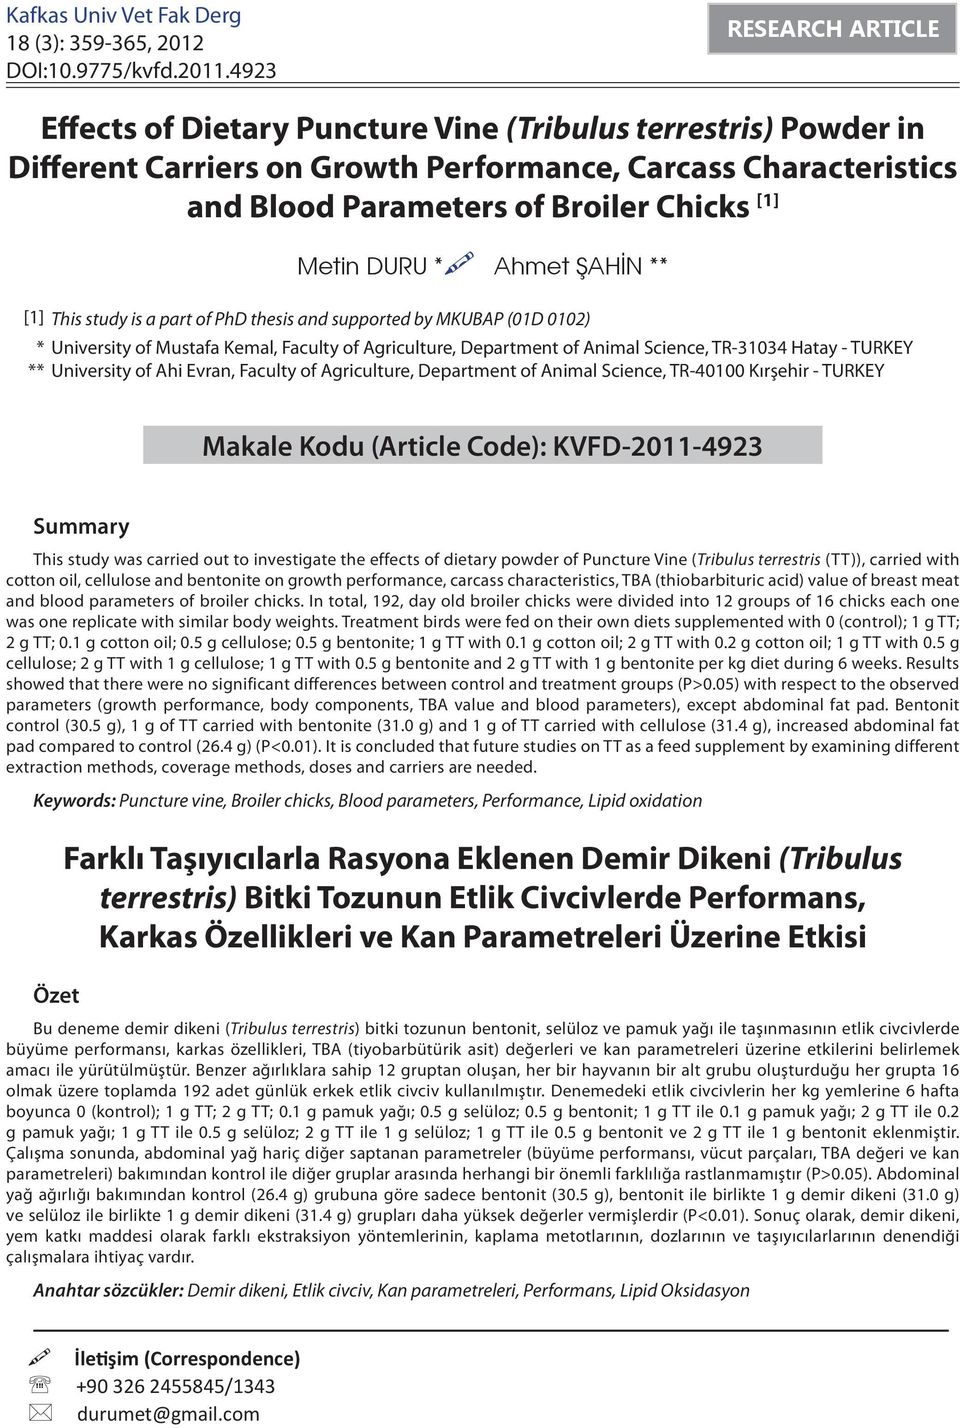 Metin DURU * Ahmet ŞAHİN ** [1] This study is a part of PhD thesis and supported by MKUBAP (01D 0102) * University of Mustafa Kemal, Faculty of Agriculture, Department of Animal Science, TR-31034